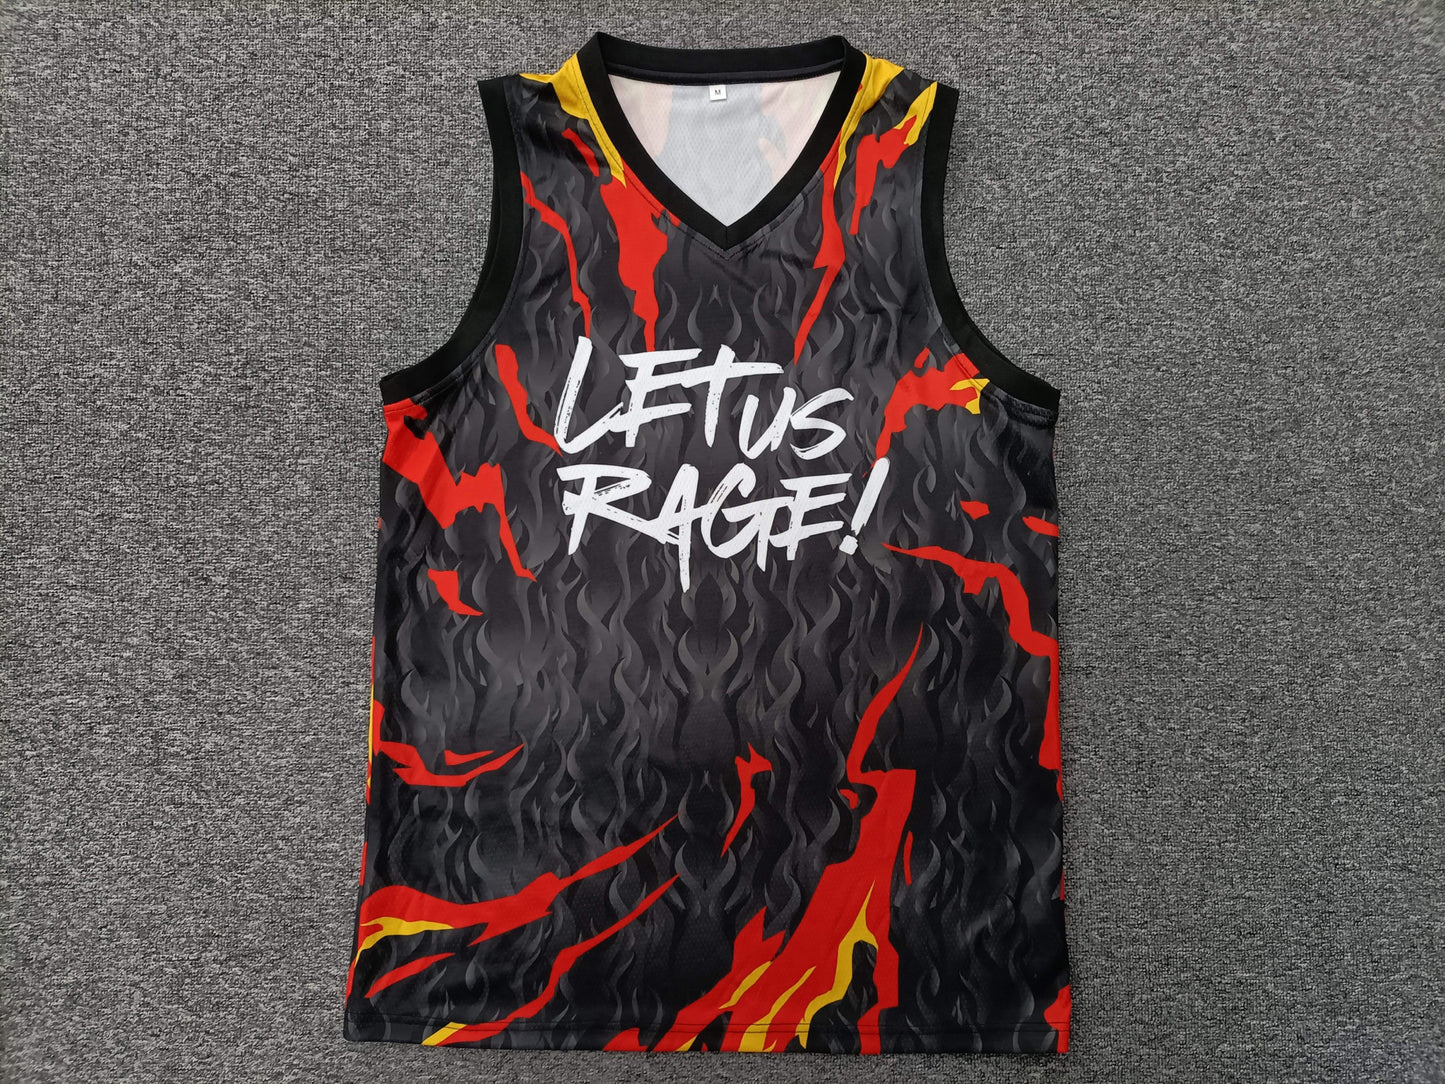 LET US RAGE! “INFERNO” JERSEY